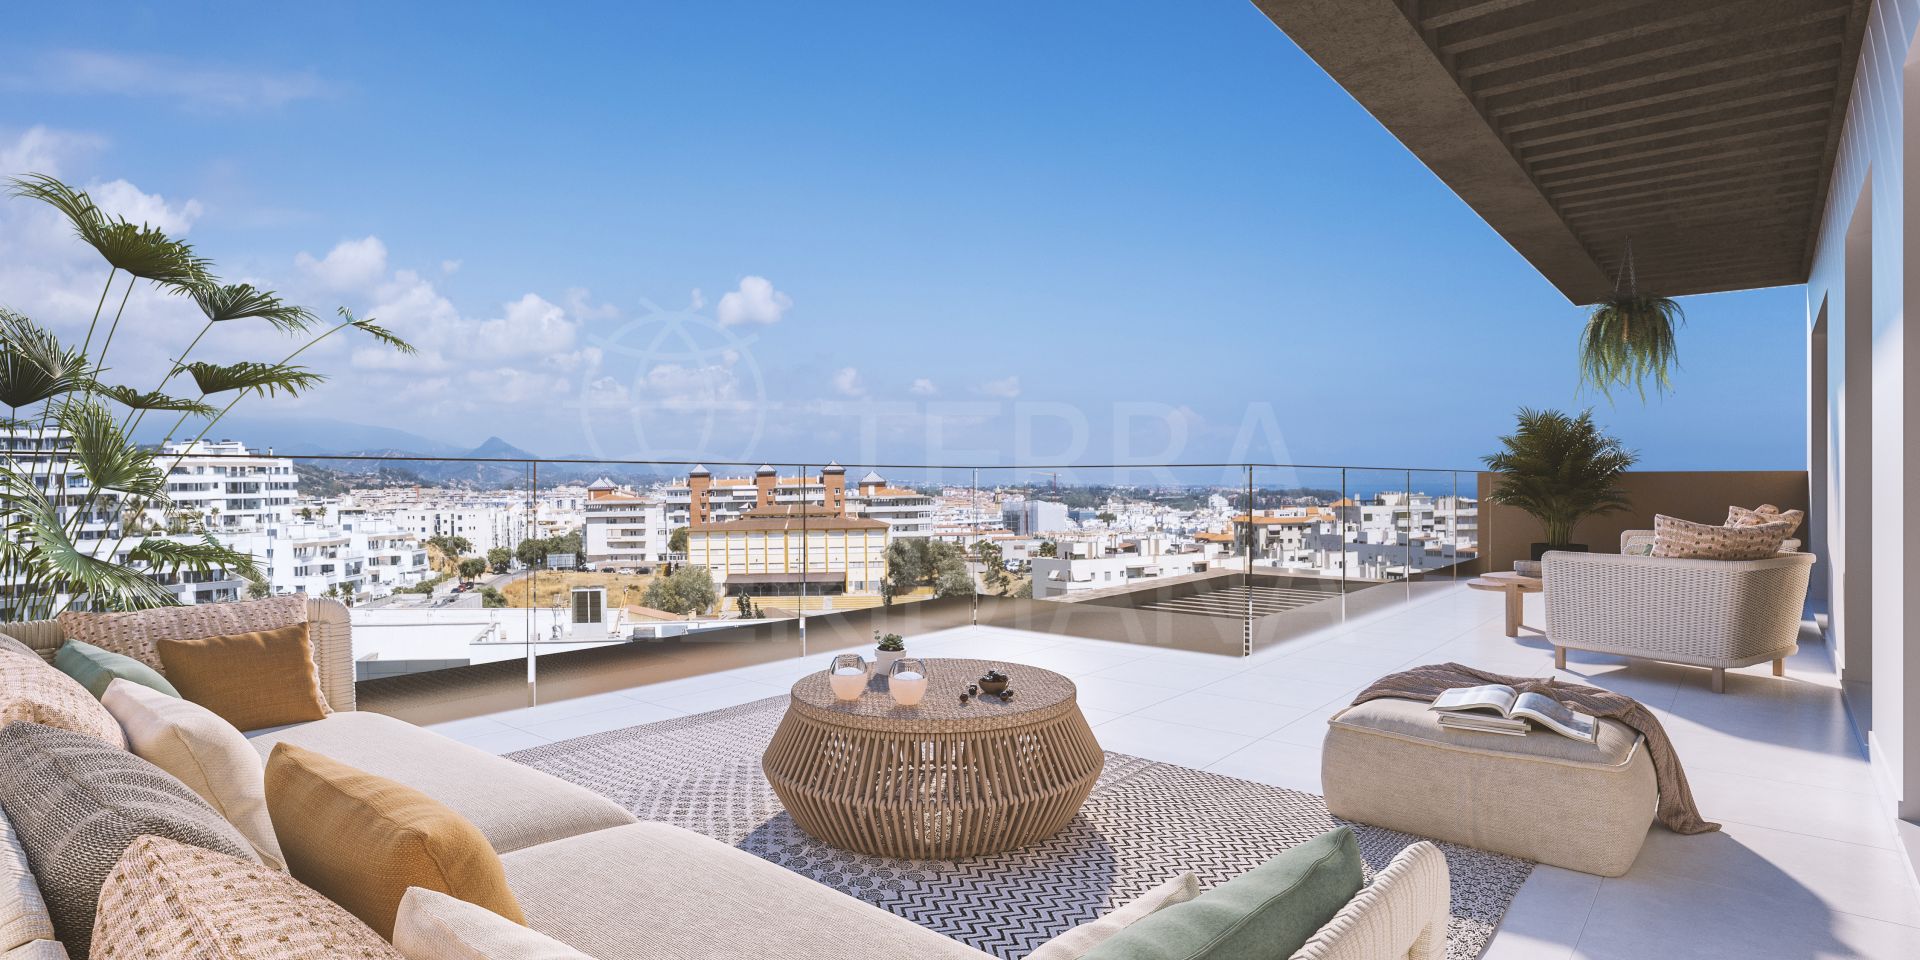 Mesas Homes, Estepona - Mesas Homes features 1, 2, 3 or 4 bedroom apartments with gorgeous sea views for sale in Estepona